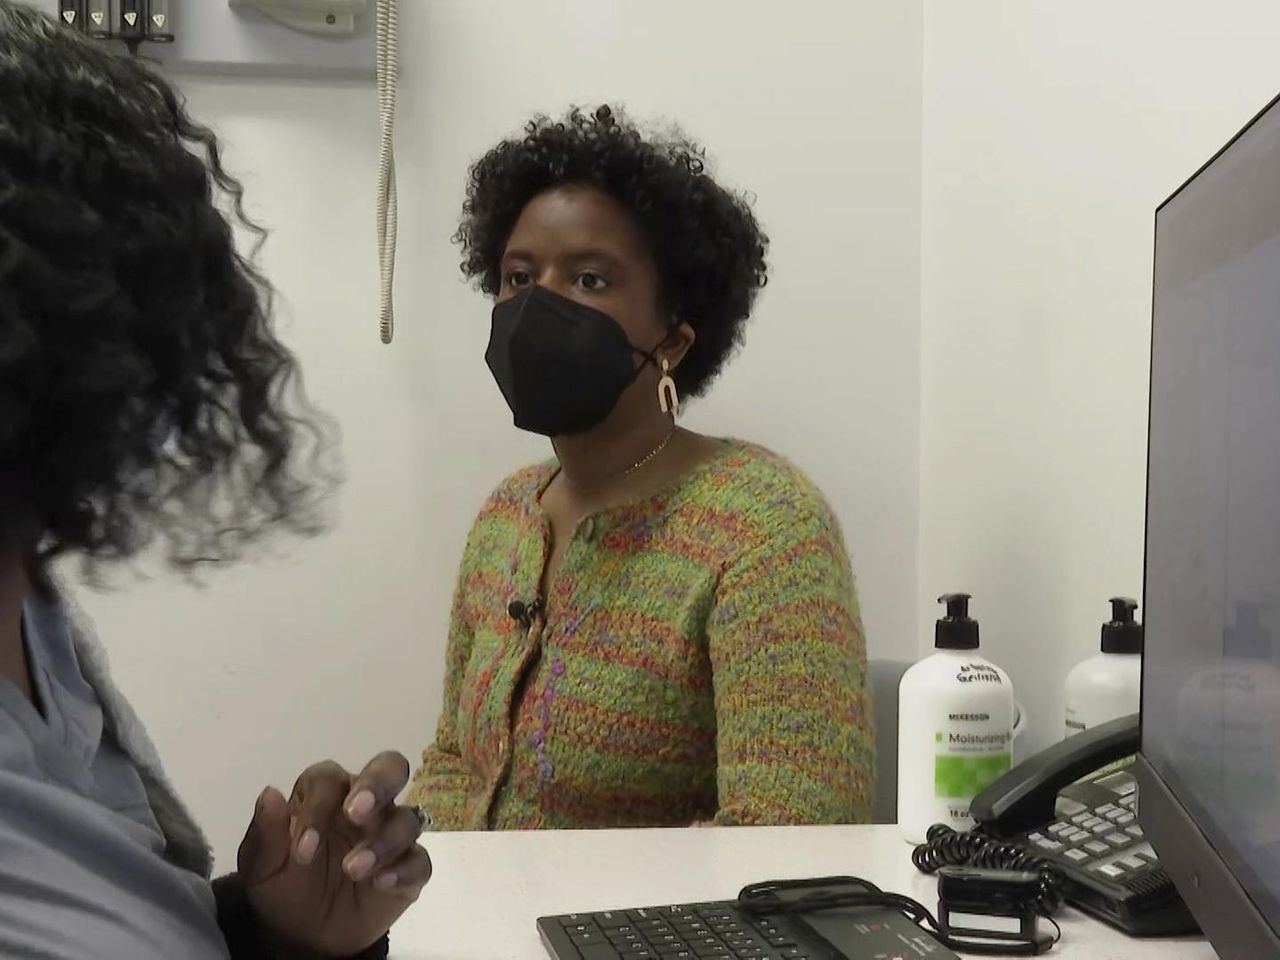 A biased test kept thousands of Black people from getting a kidney transplant. It's finally changing